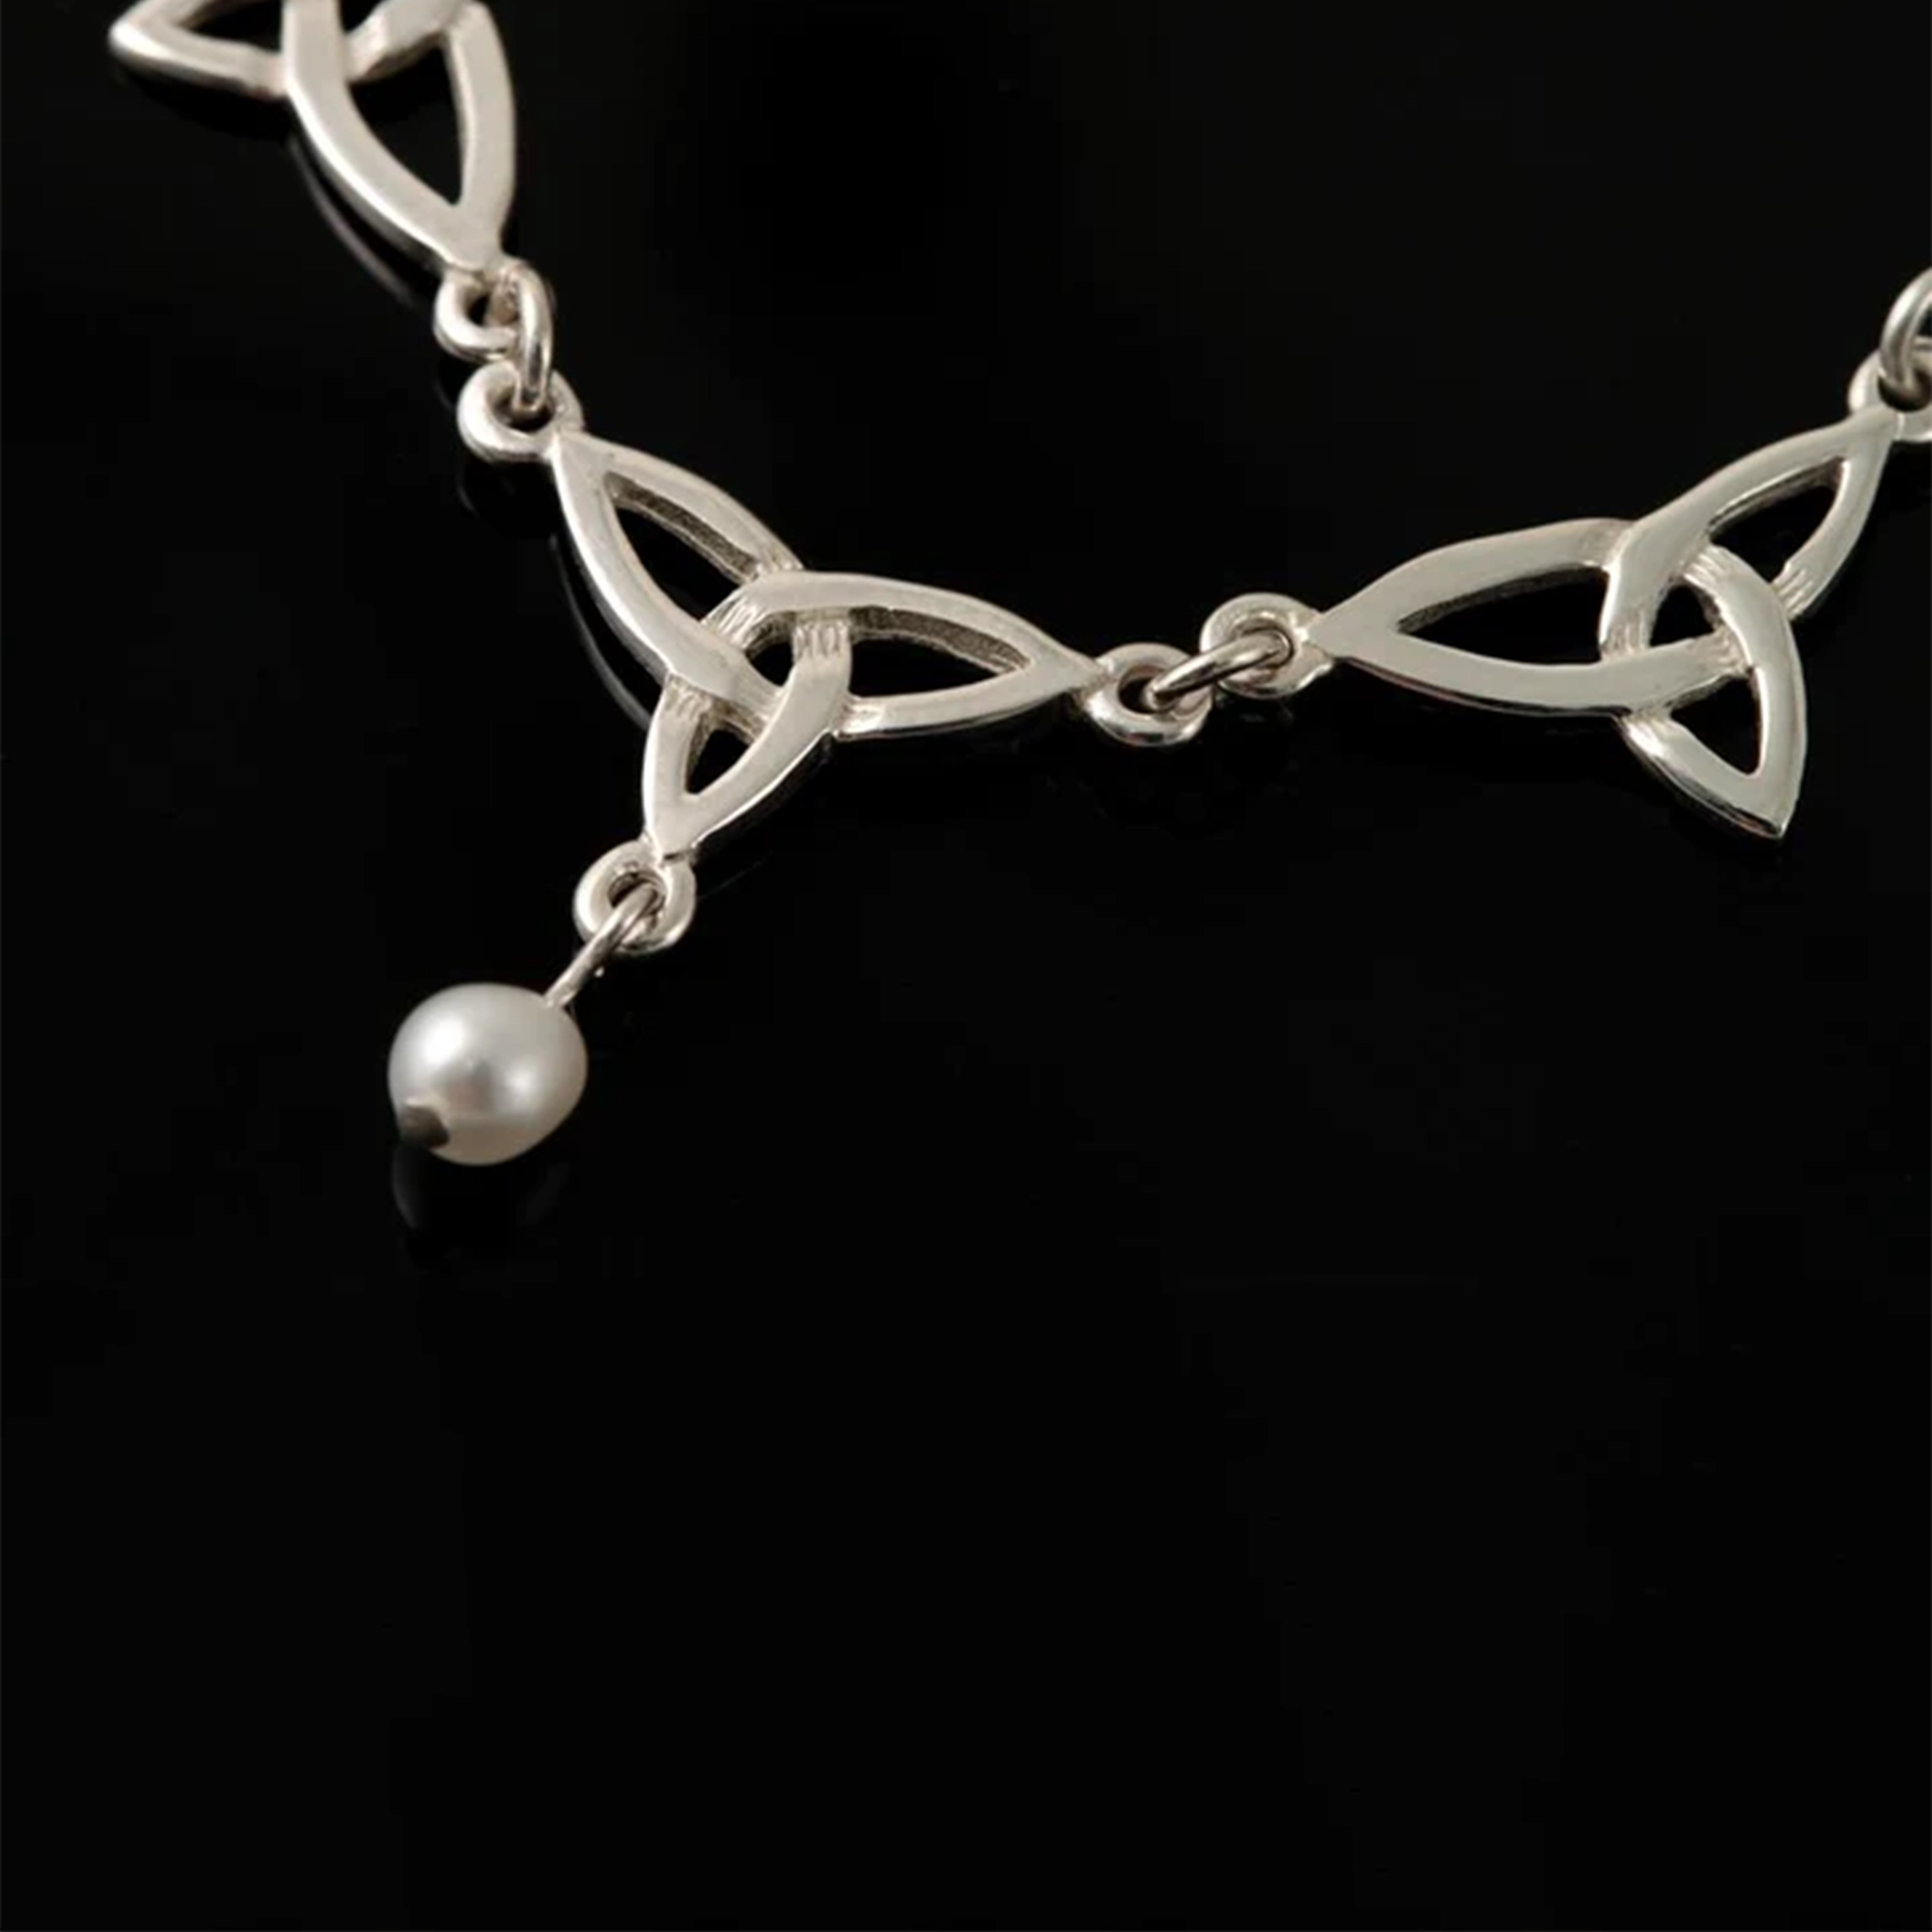 A triple link trinity knot silver necklace with a single dangling white teardrop pearl